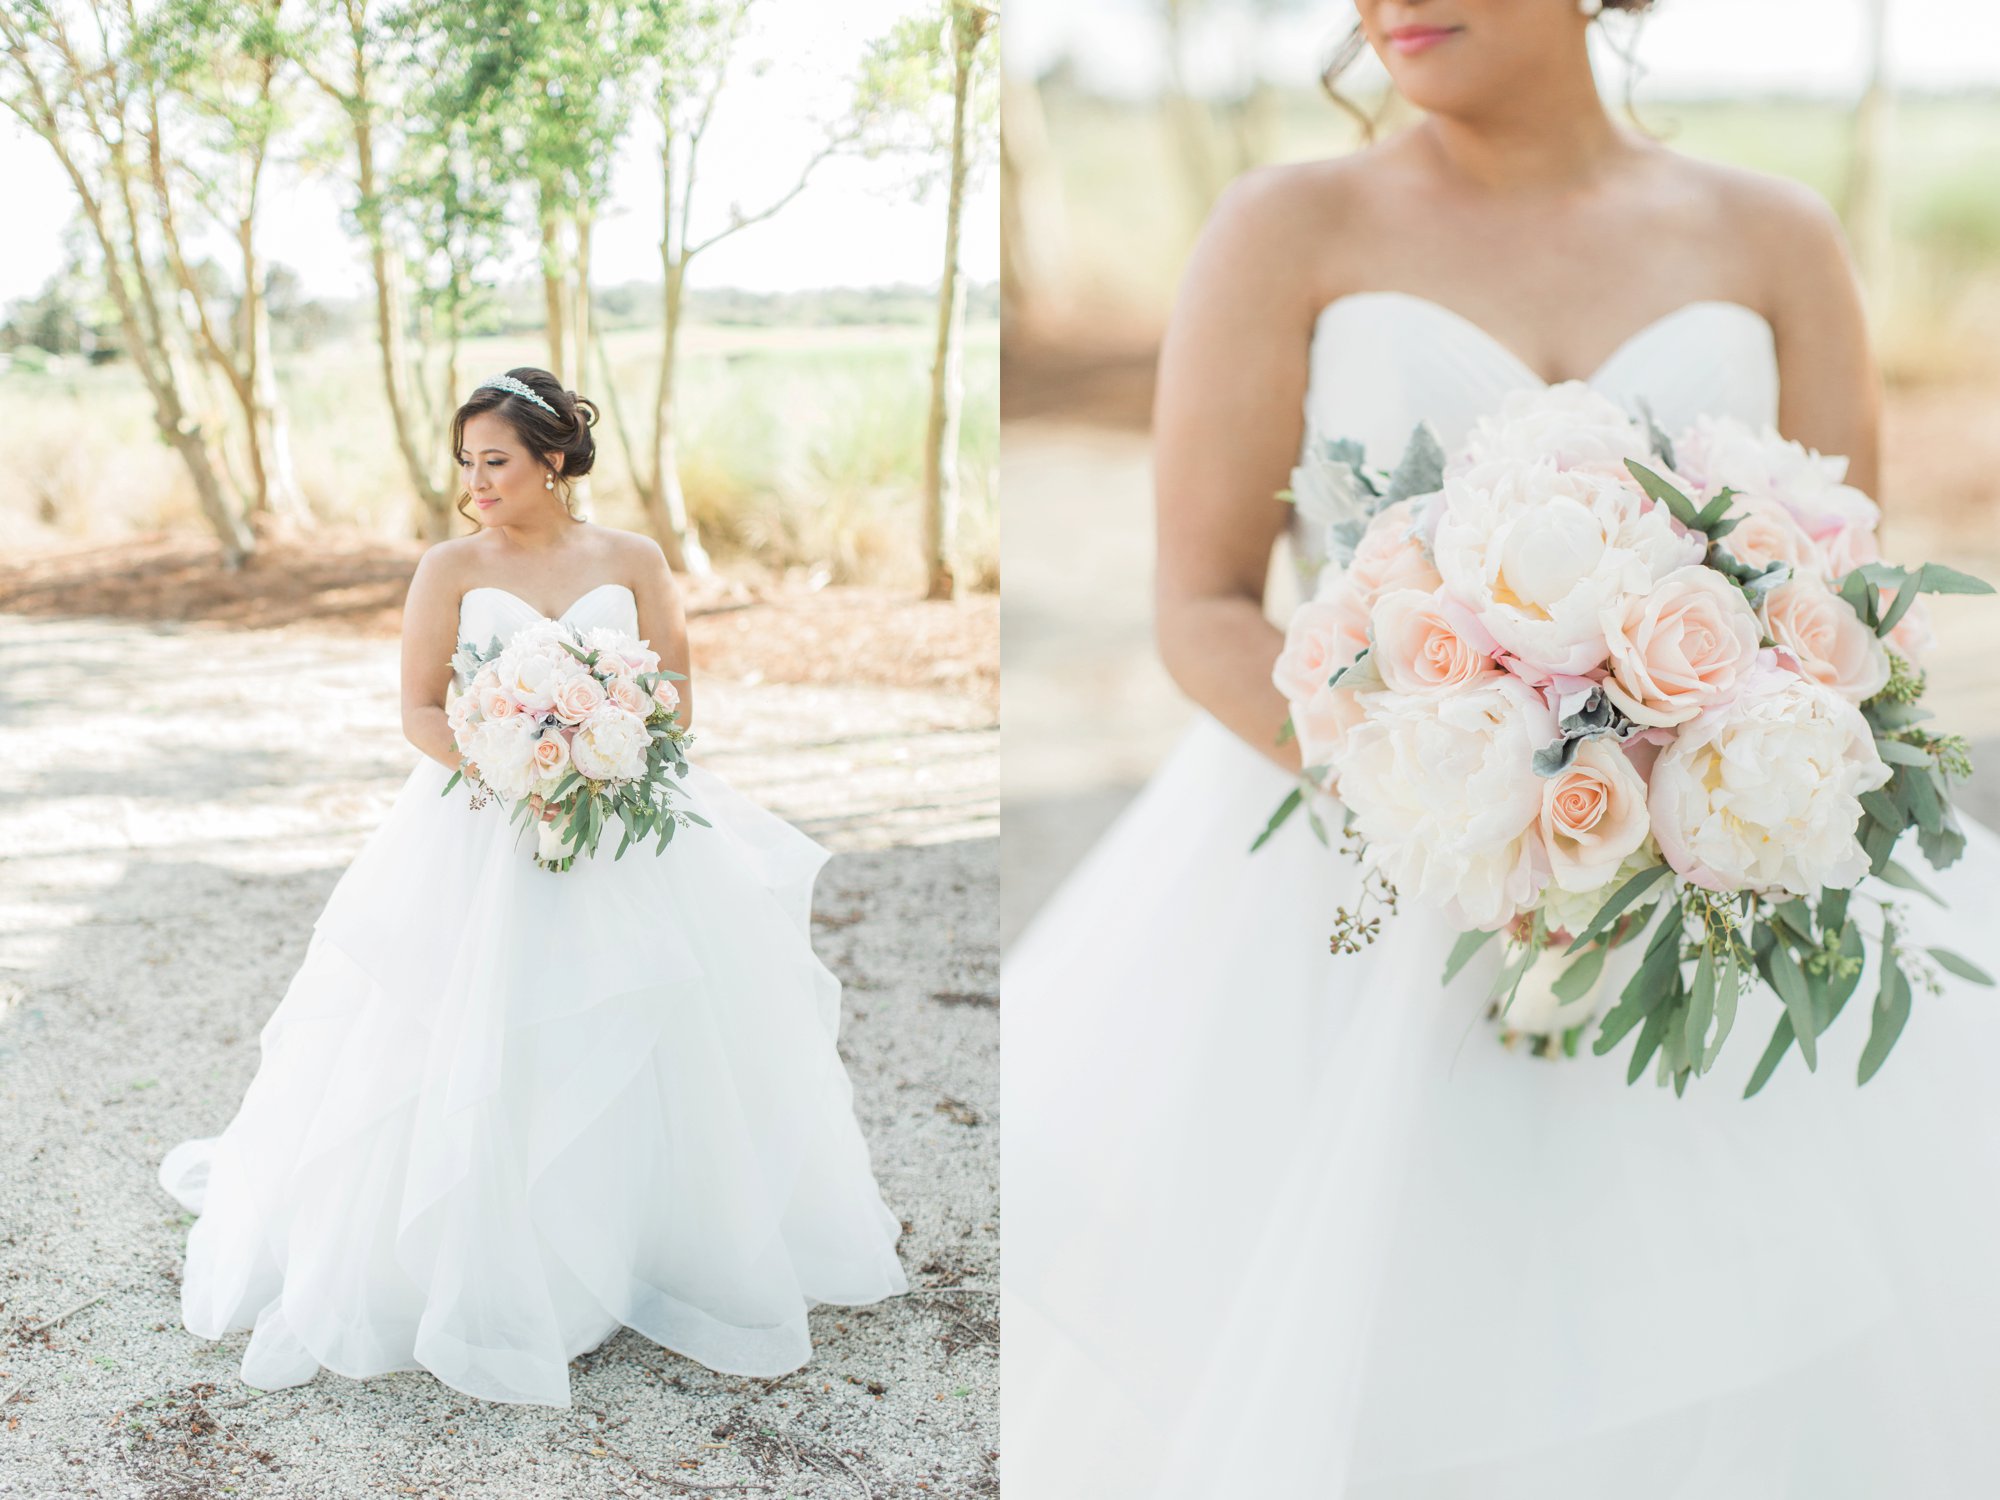 Five Wedding Trends We Love 2018-2019, The Royal Crest Room , orlando wedding photographer, the royal crest room wedding, orlando wedding venues,